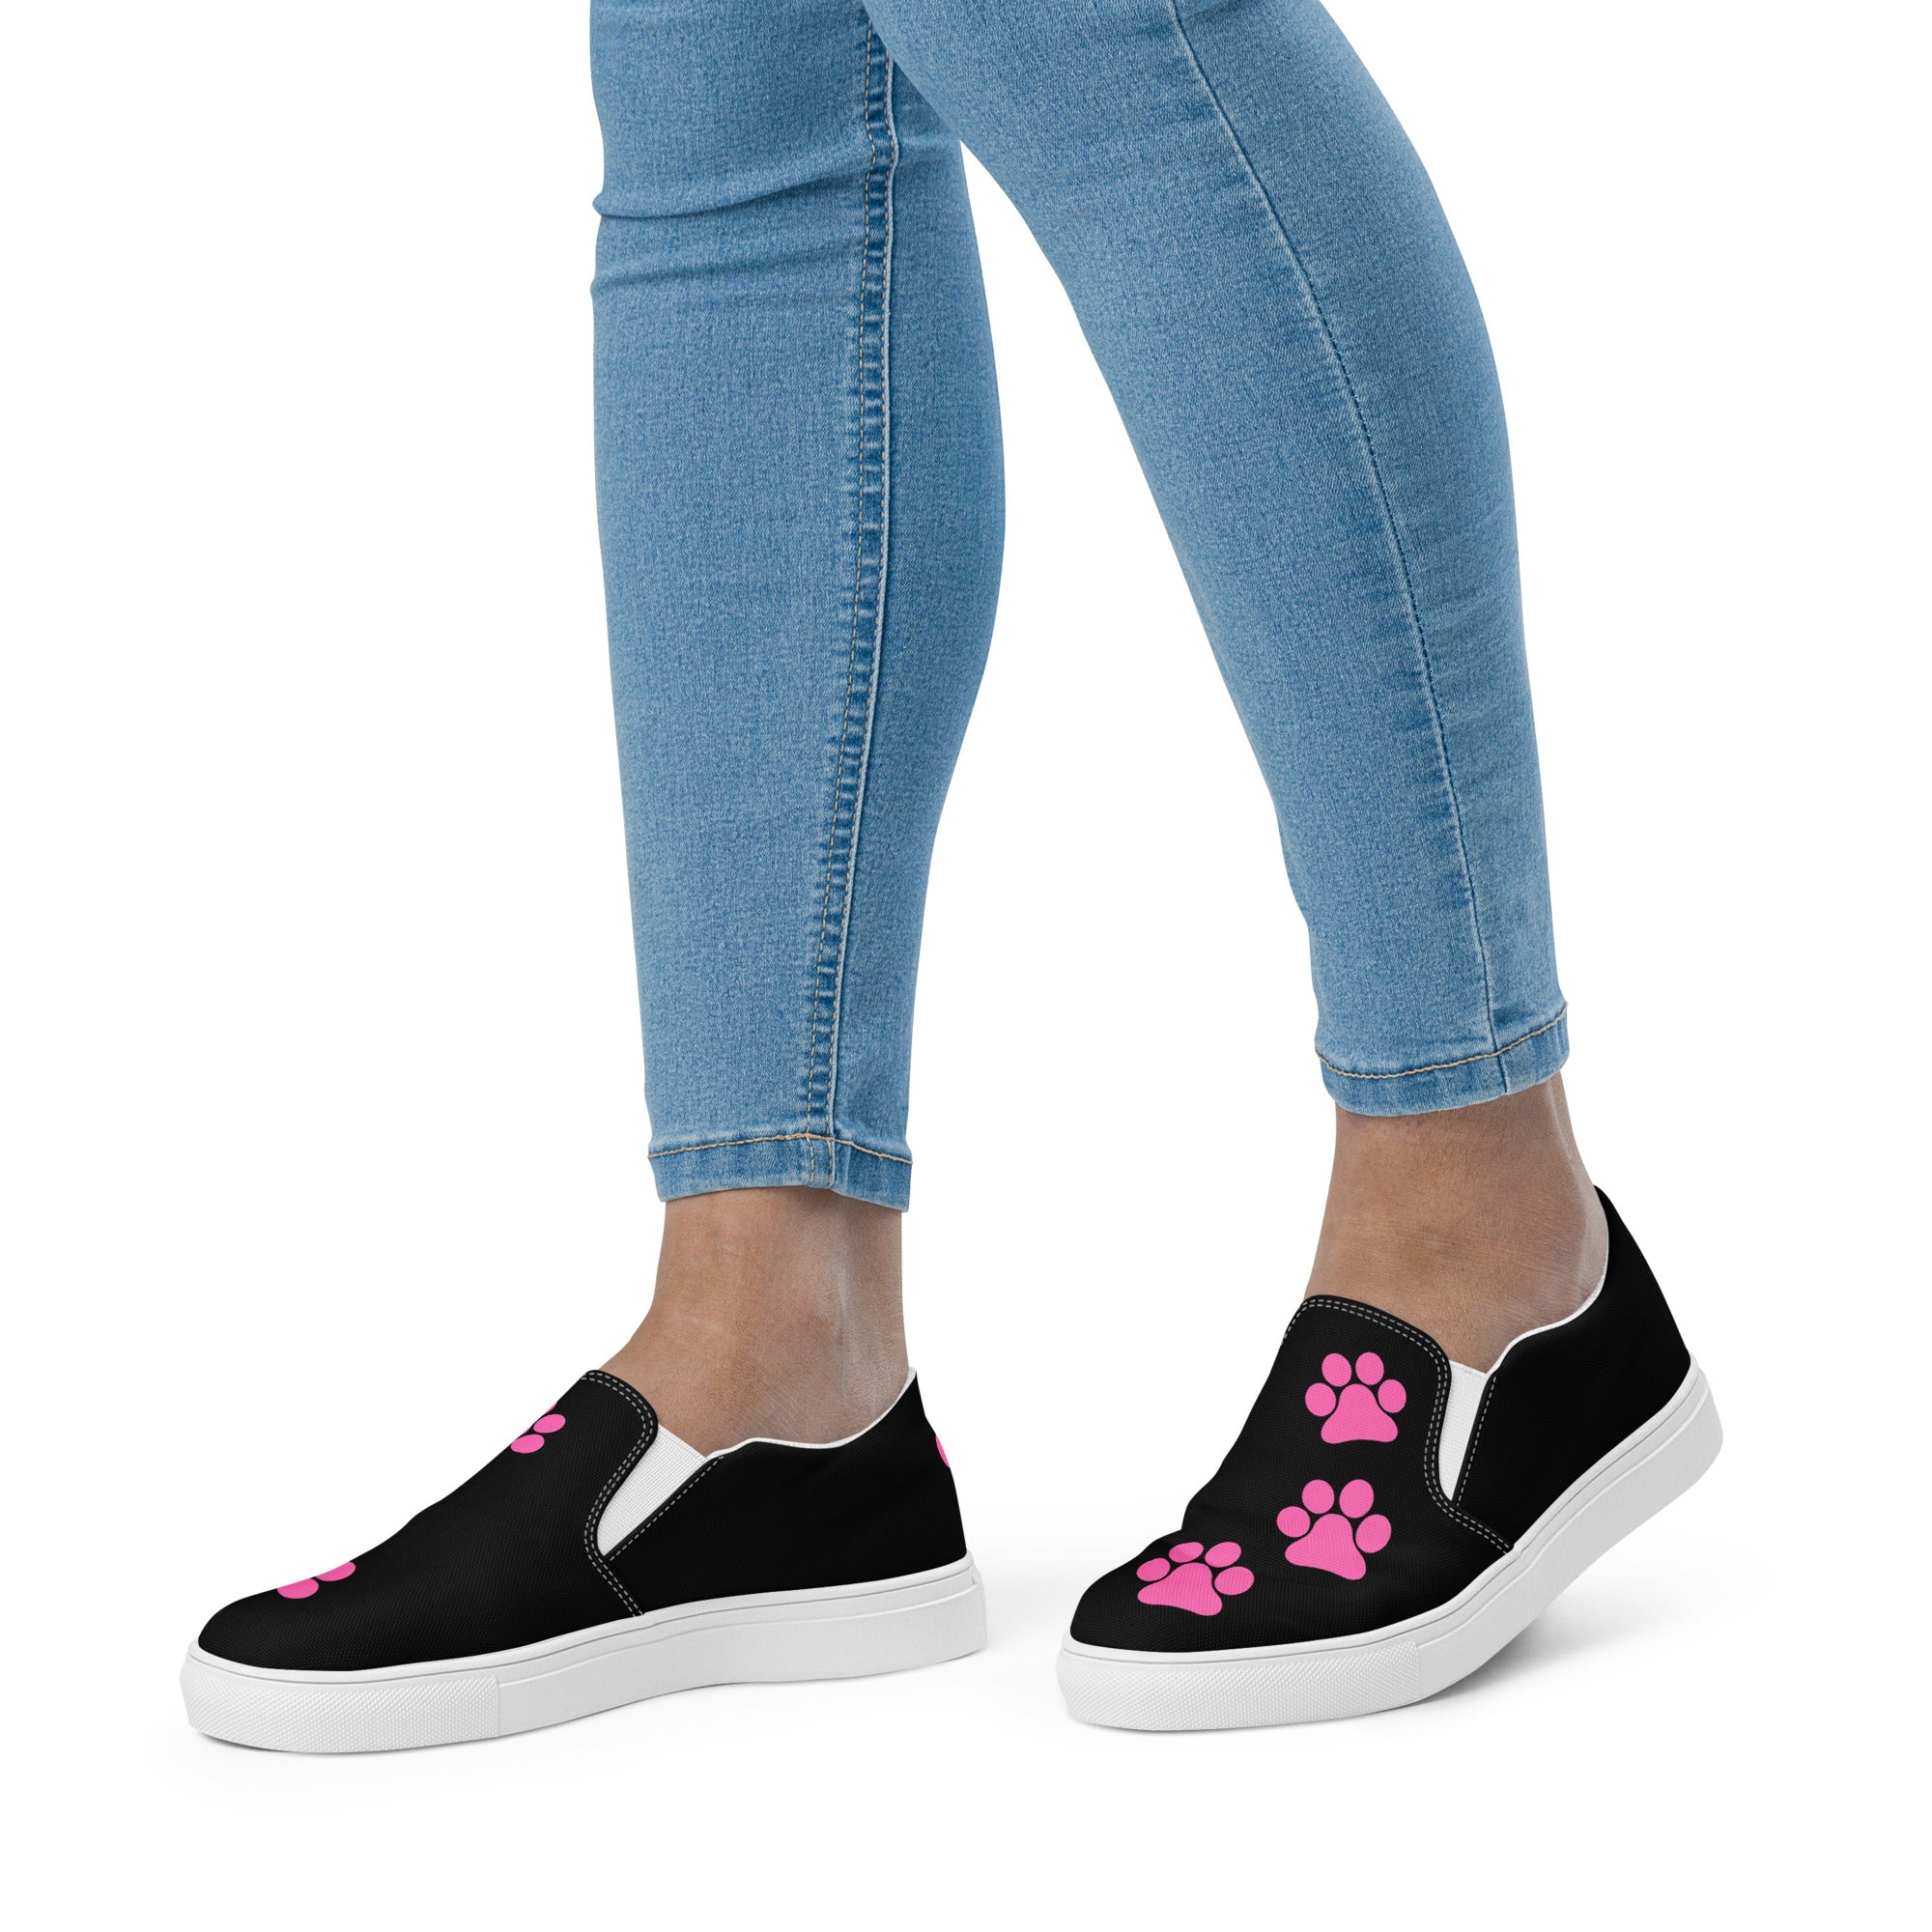 Women’s slip-on Black Hot Pink Paw shoes